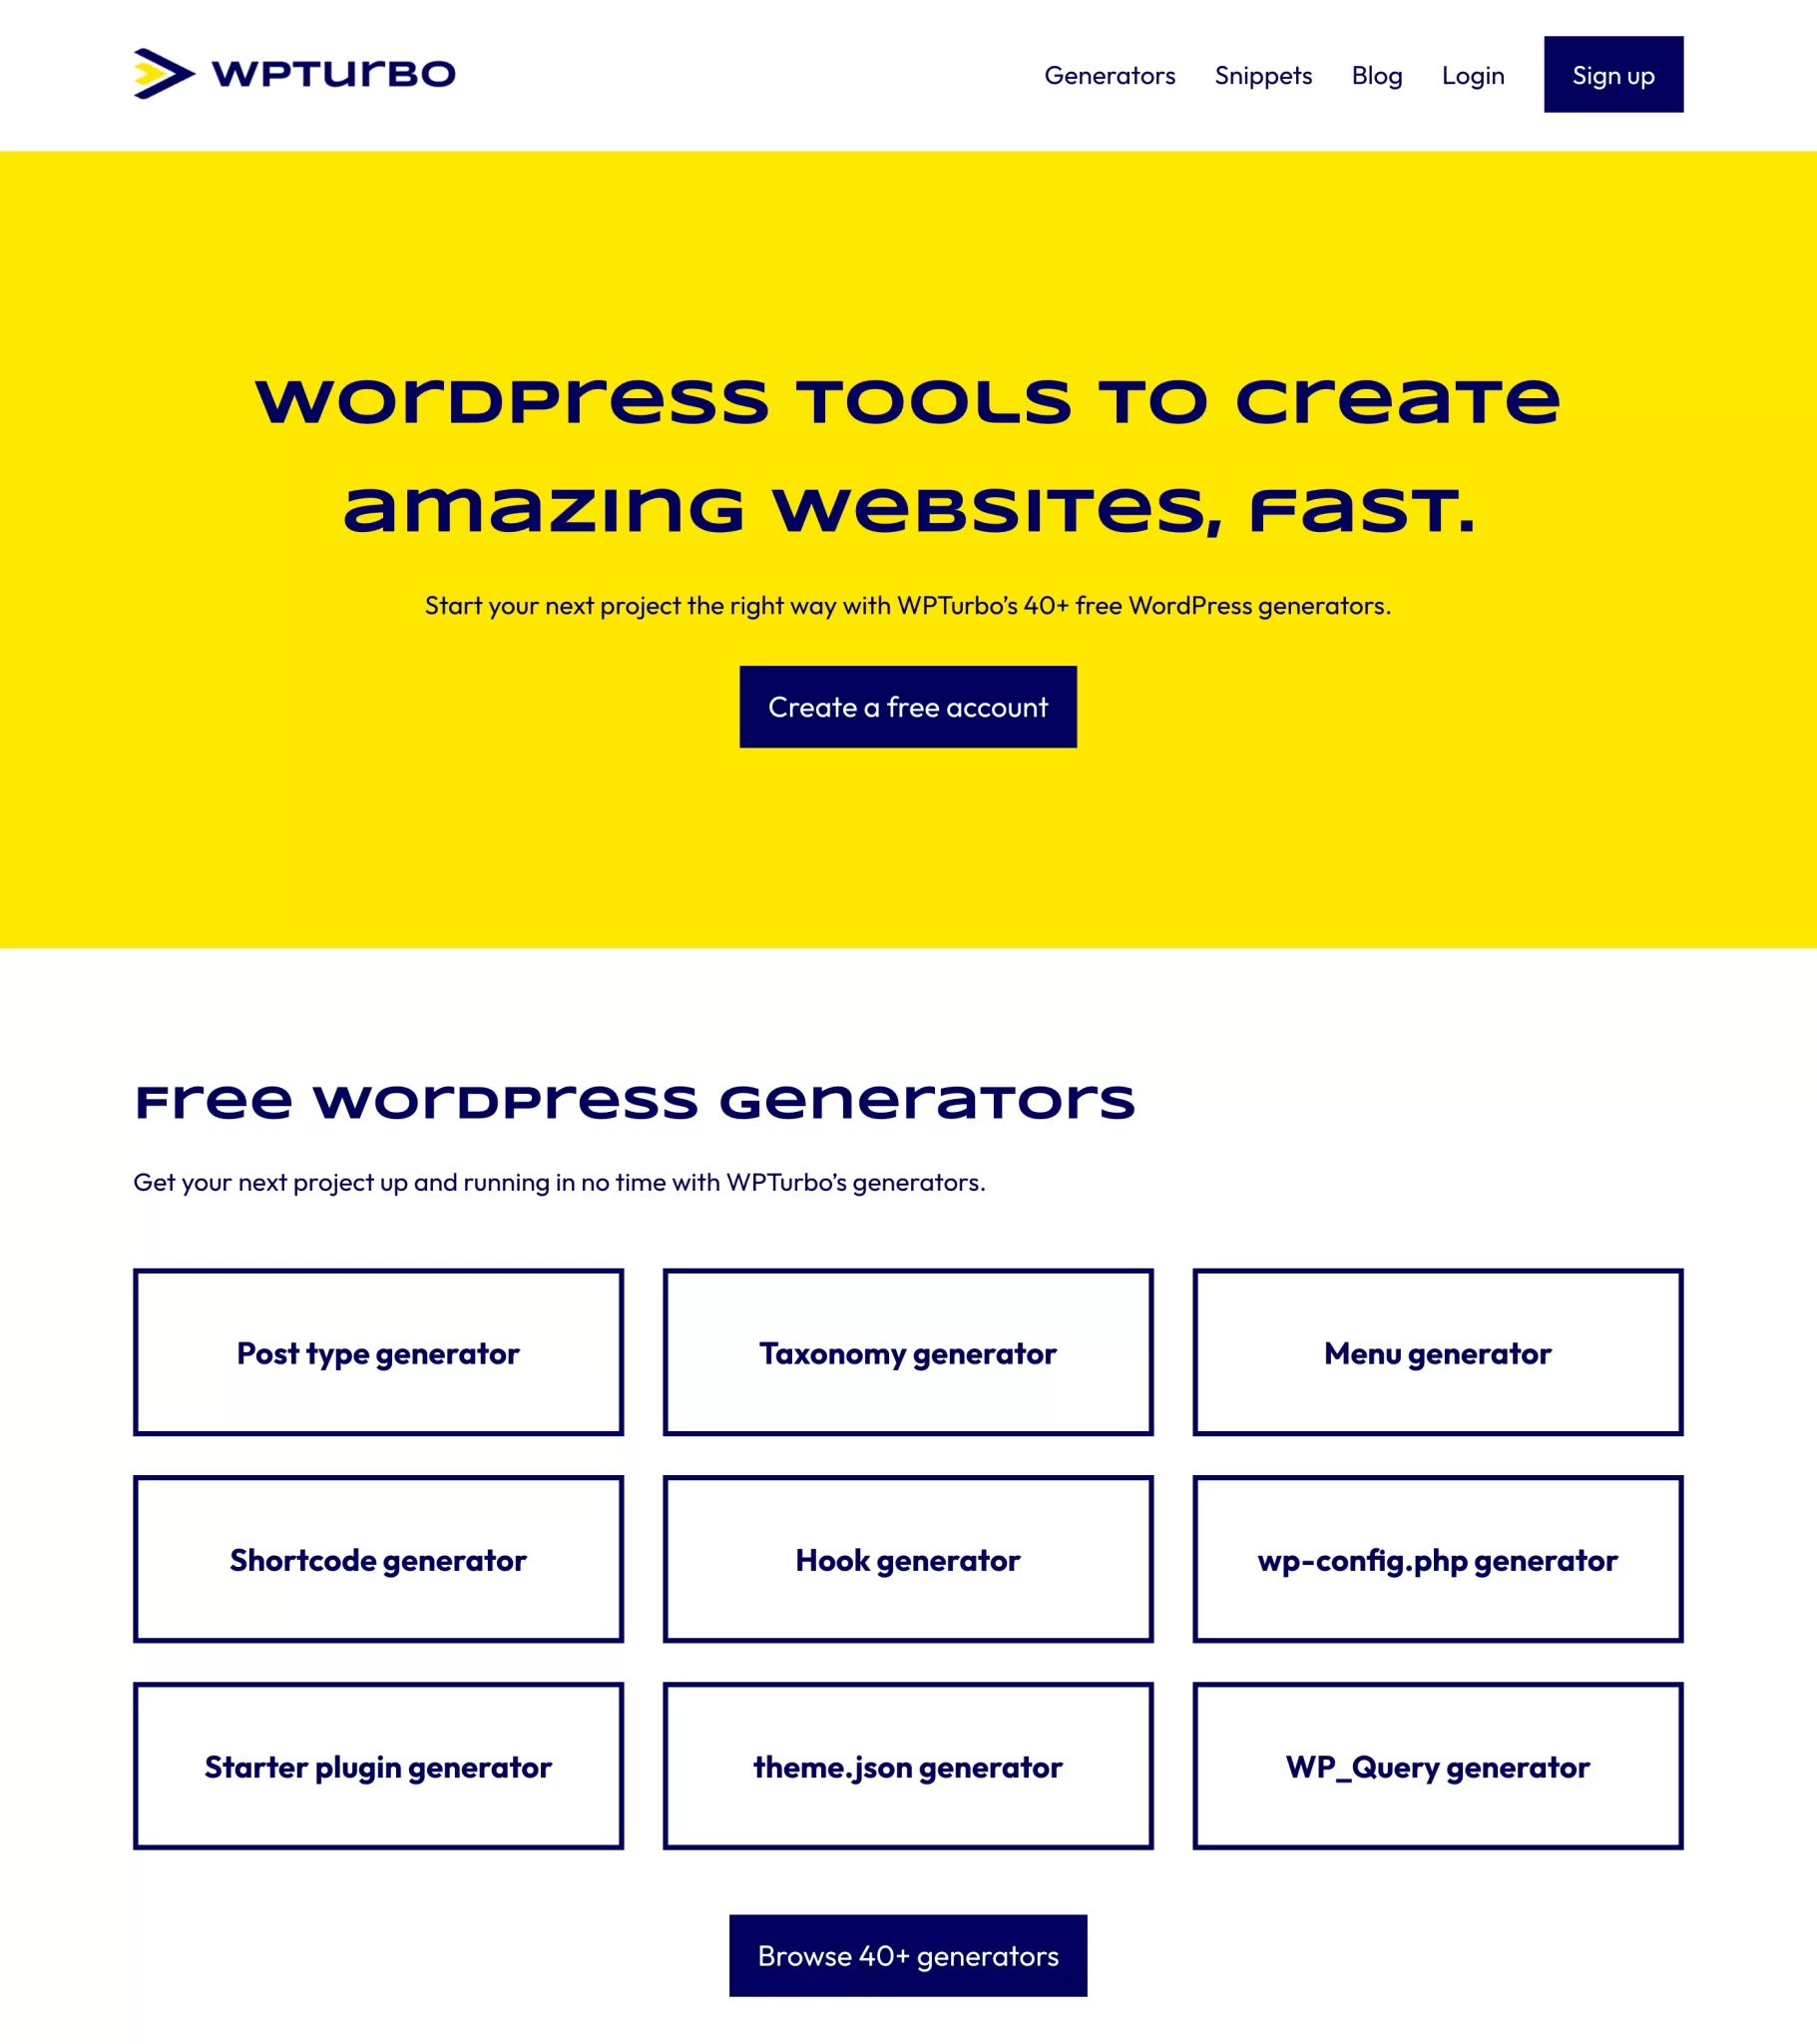 Home page of WPTurbo, the website to help WordPress developers build websites faster.